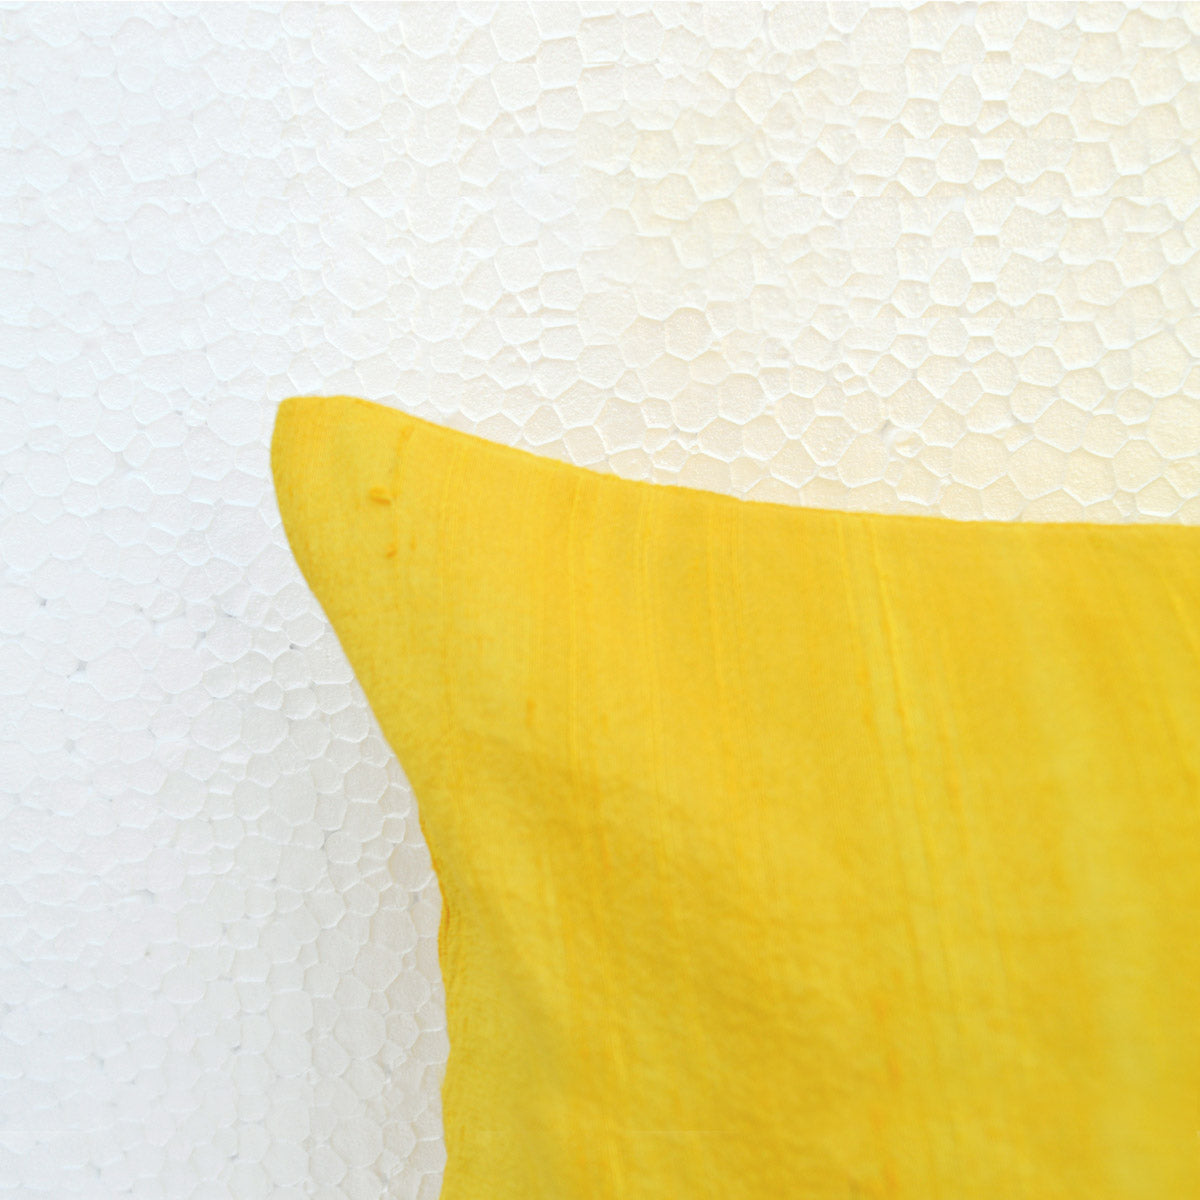 Yellow solid pure silk pillow cover, sizes available